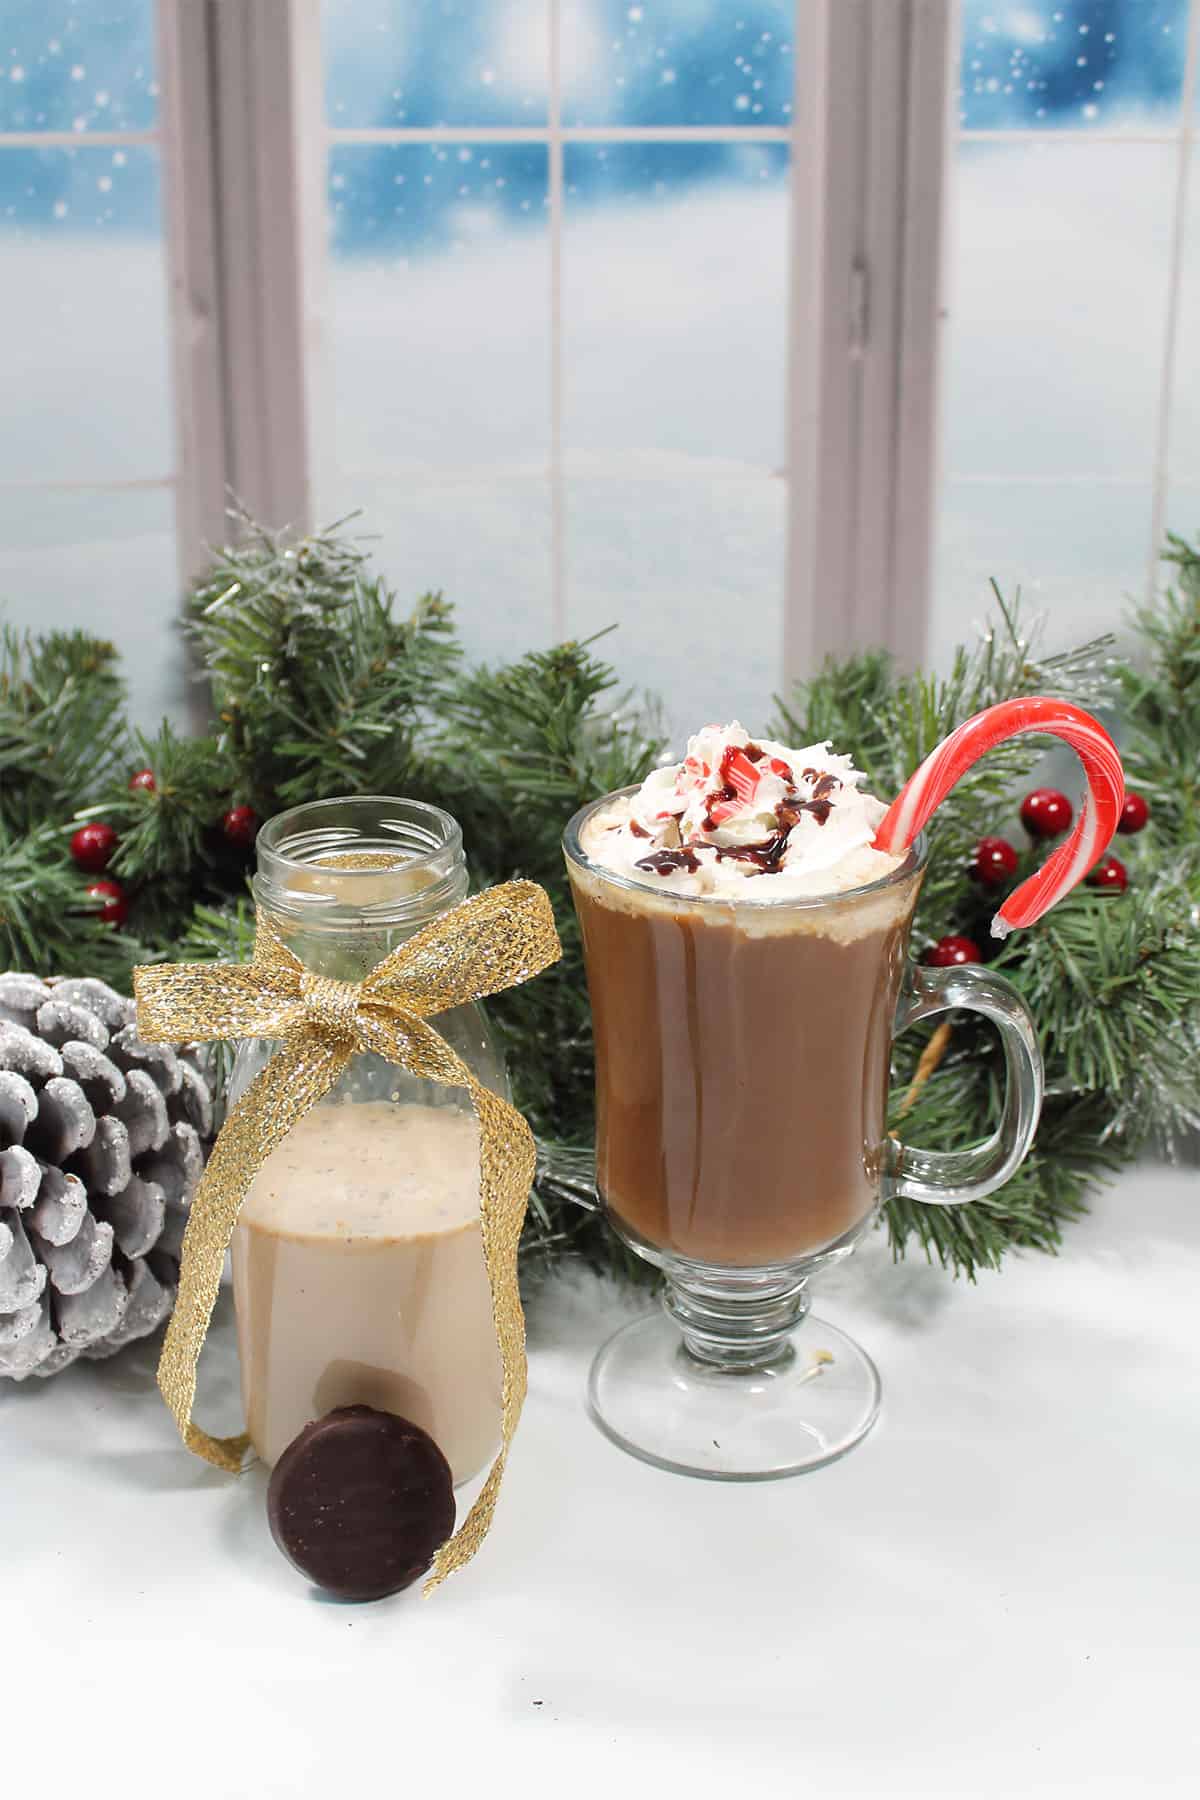 https://2cookinmamas.com/wp-content/uploads/2022/12/Creamer-next-to-mug-of-coffee-with-candy-cane-in-it-tall.jpg